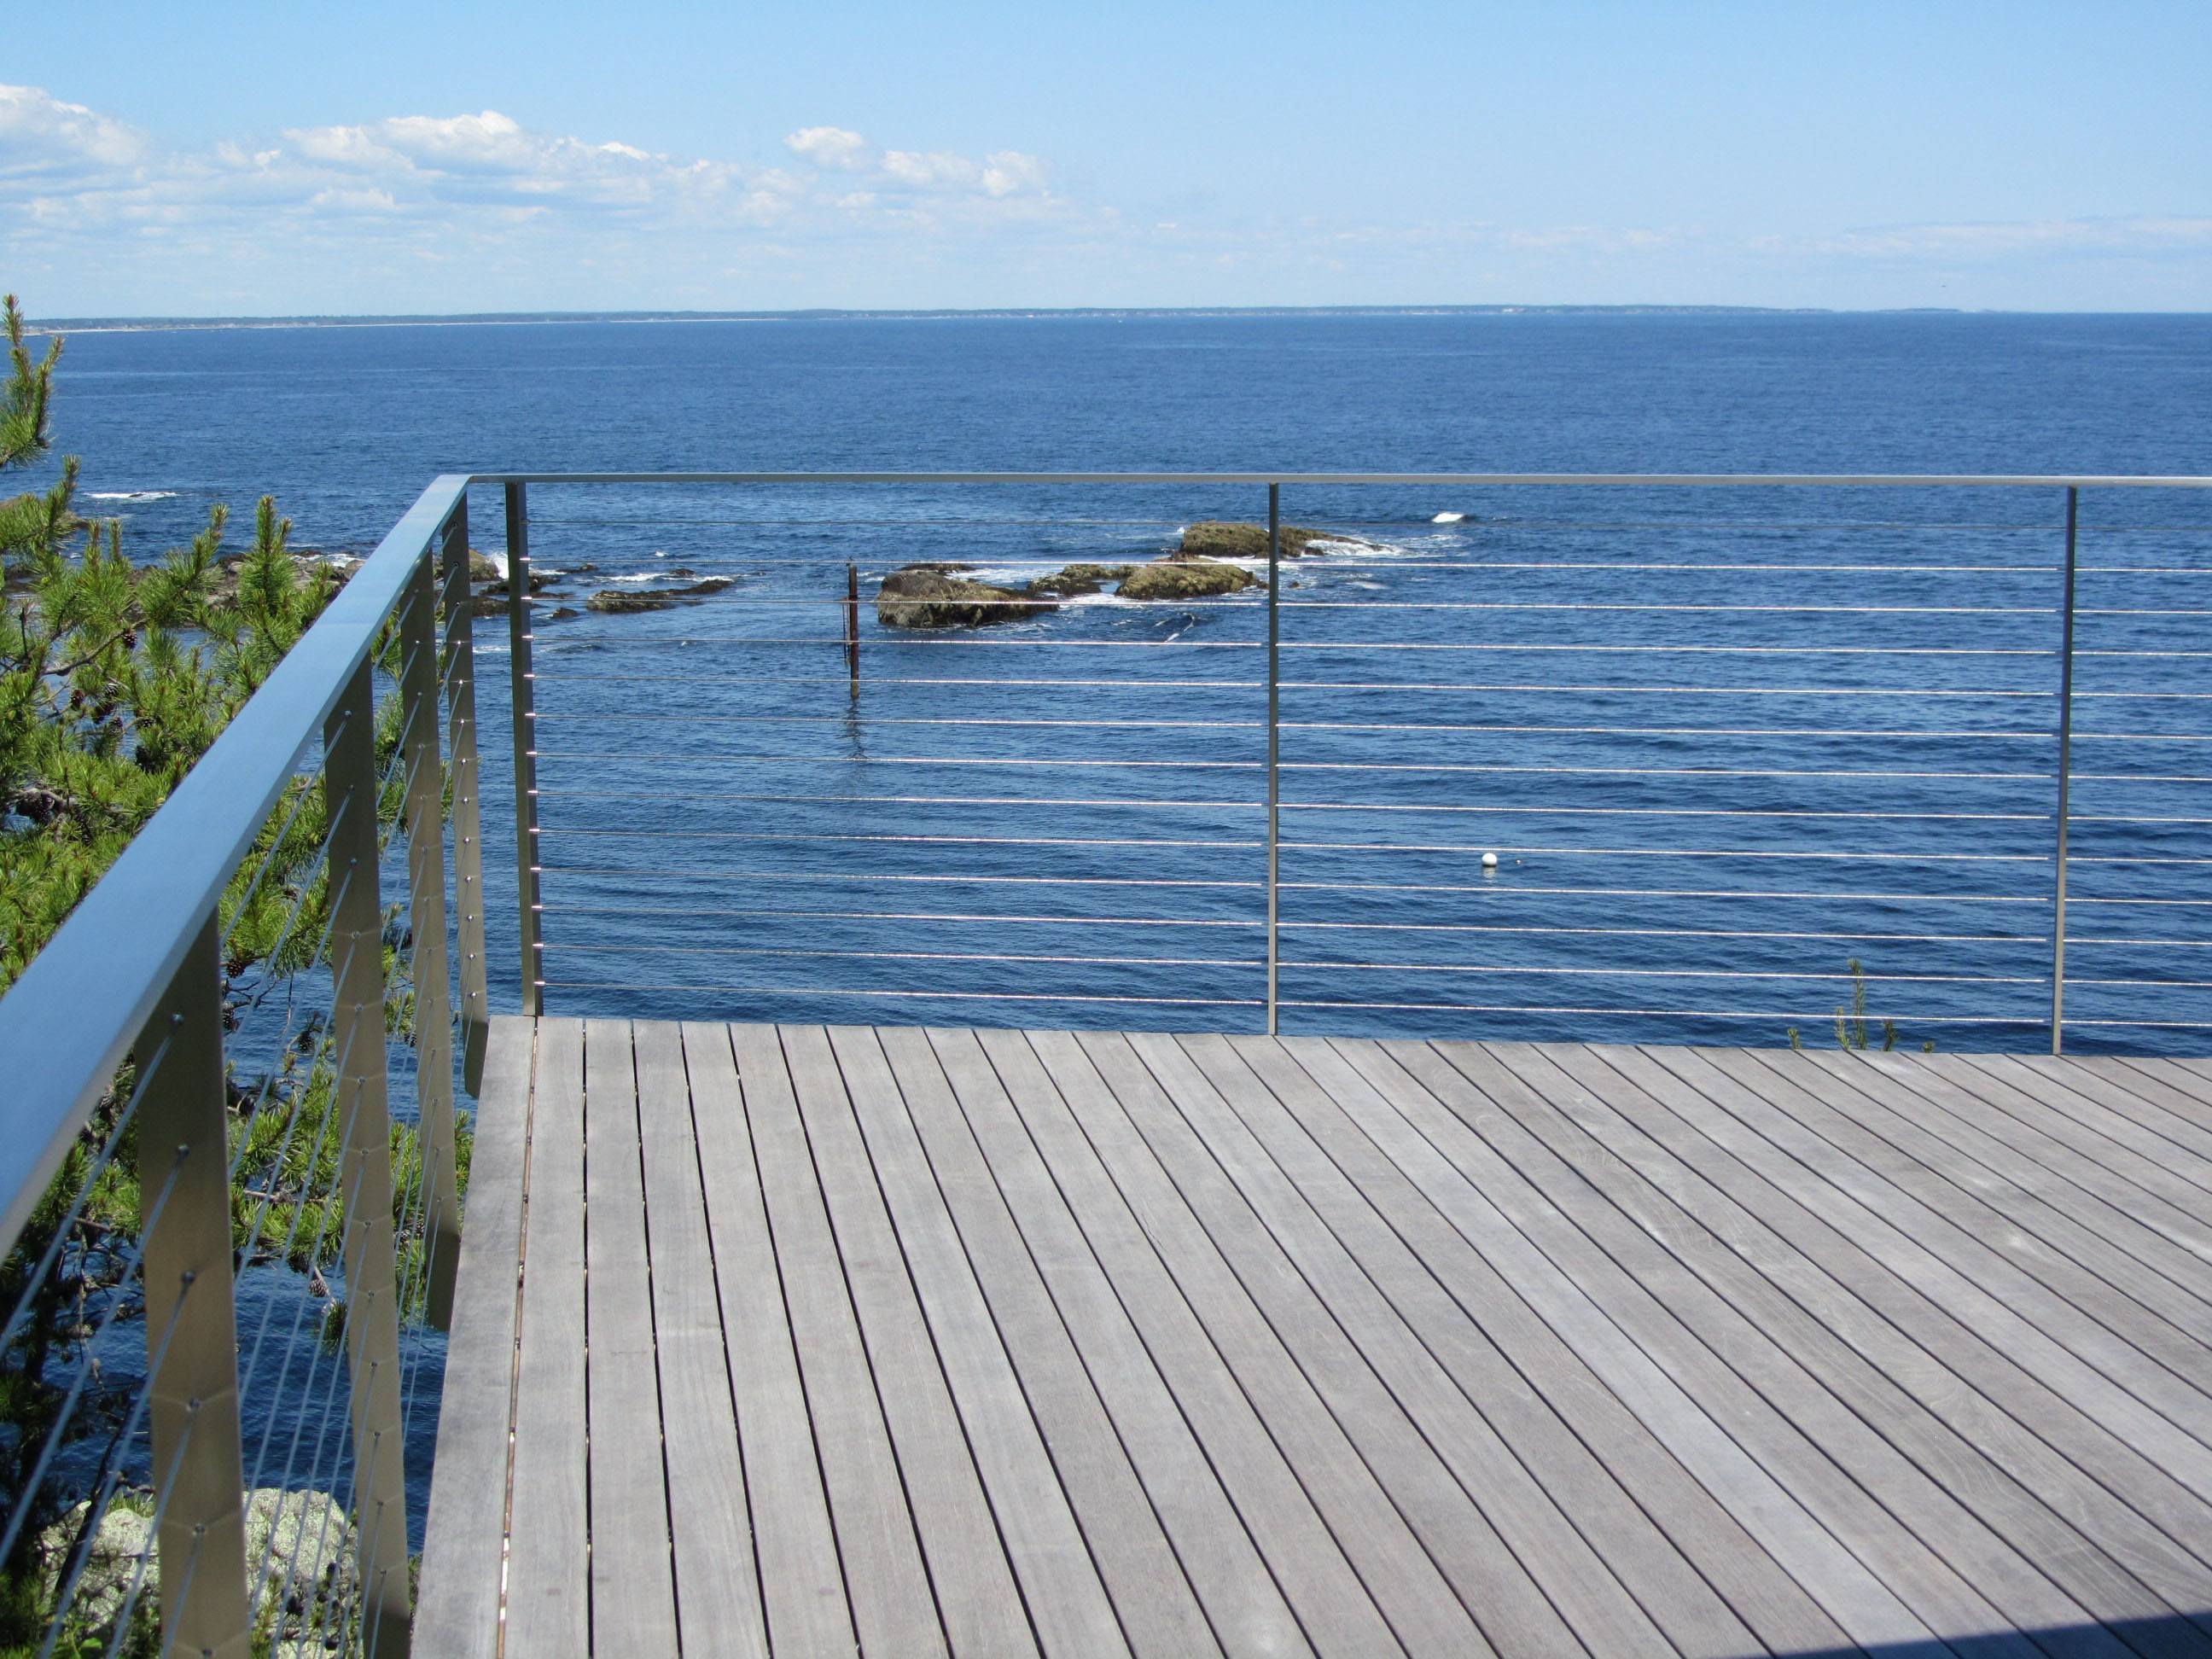 Stainless wire rope railing practically vanishes preserving the ocean view